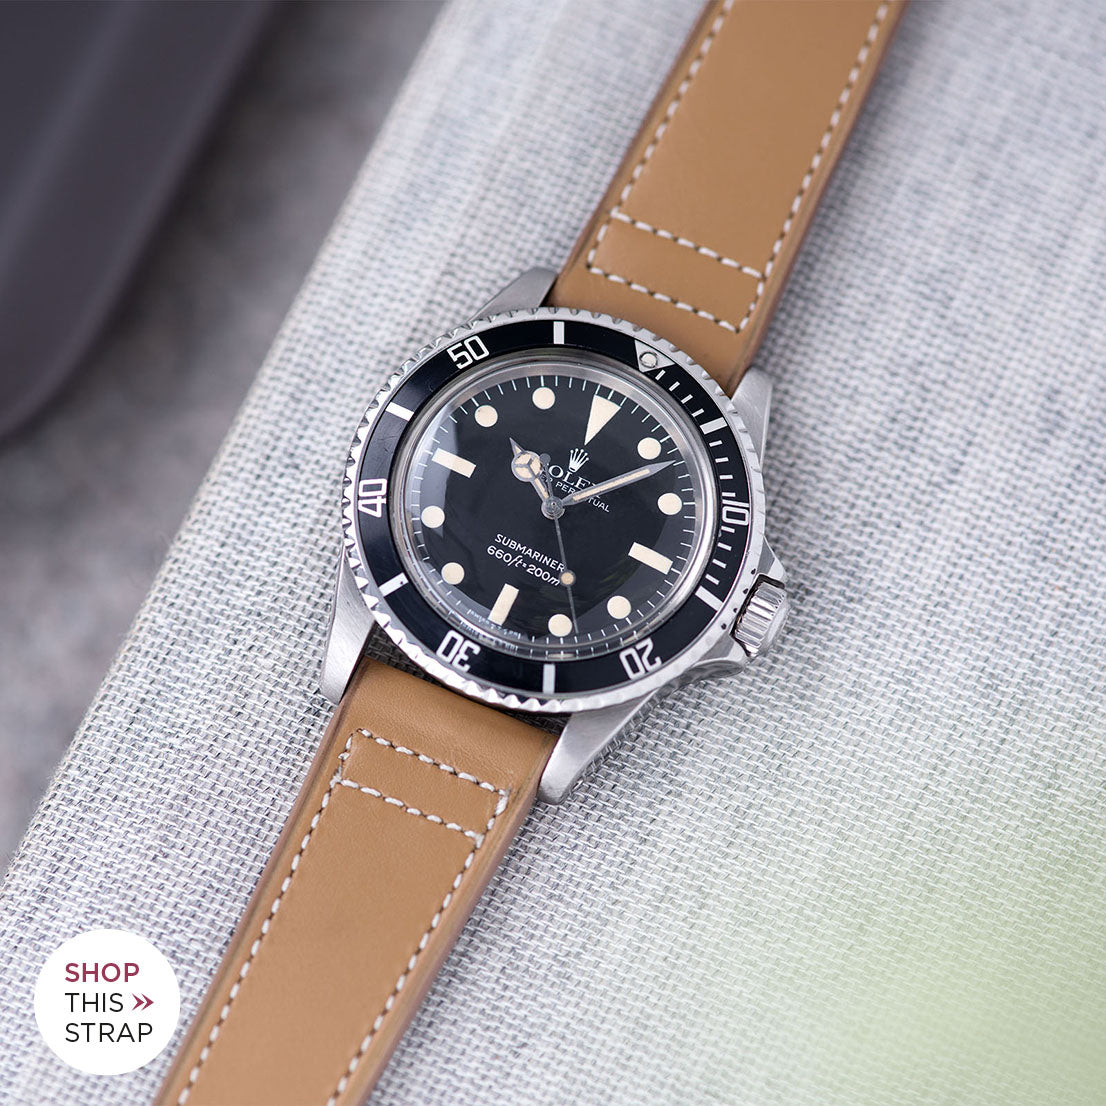 Bulang and Sons_Strap Guide_The Rolex 5513 Black Submariner_Taupe Brown Retro Leather Watch Strap